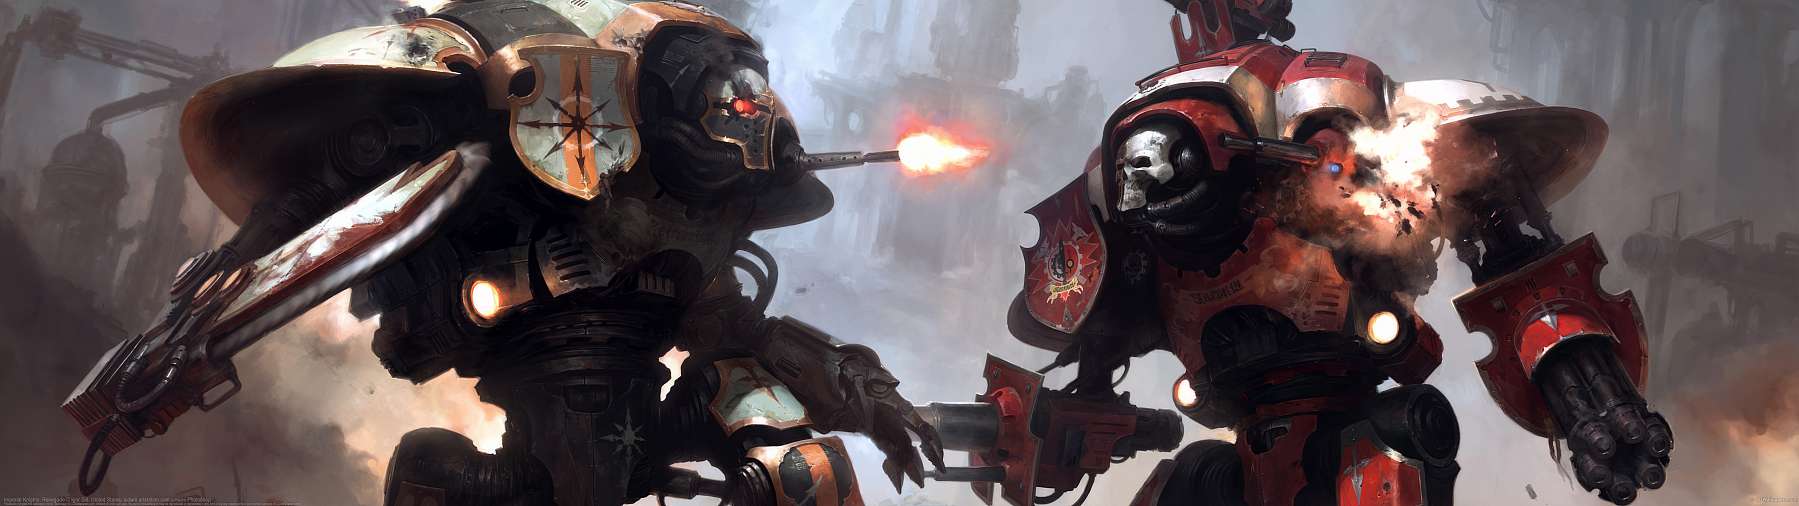 Imperial Knights: Renegade ultralarge fond d'cran